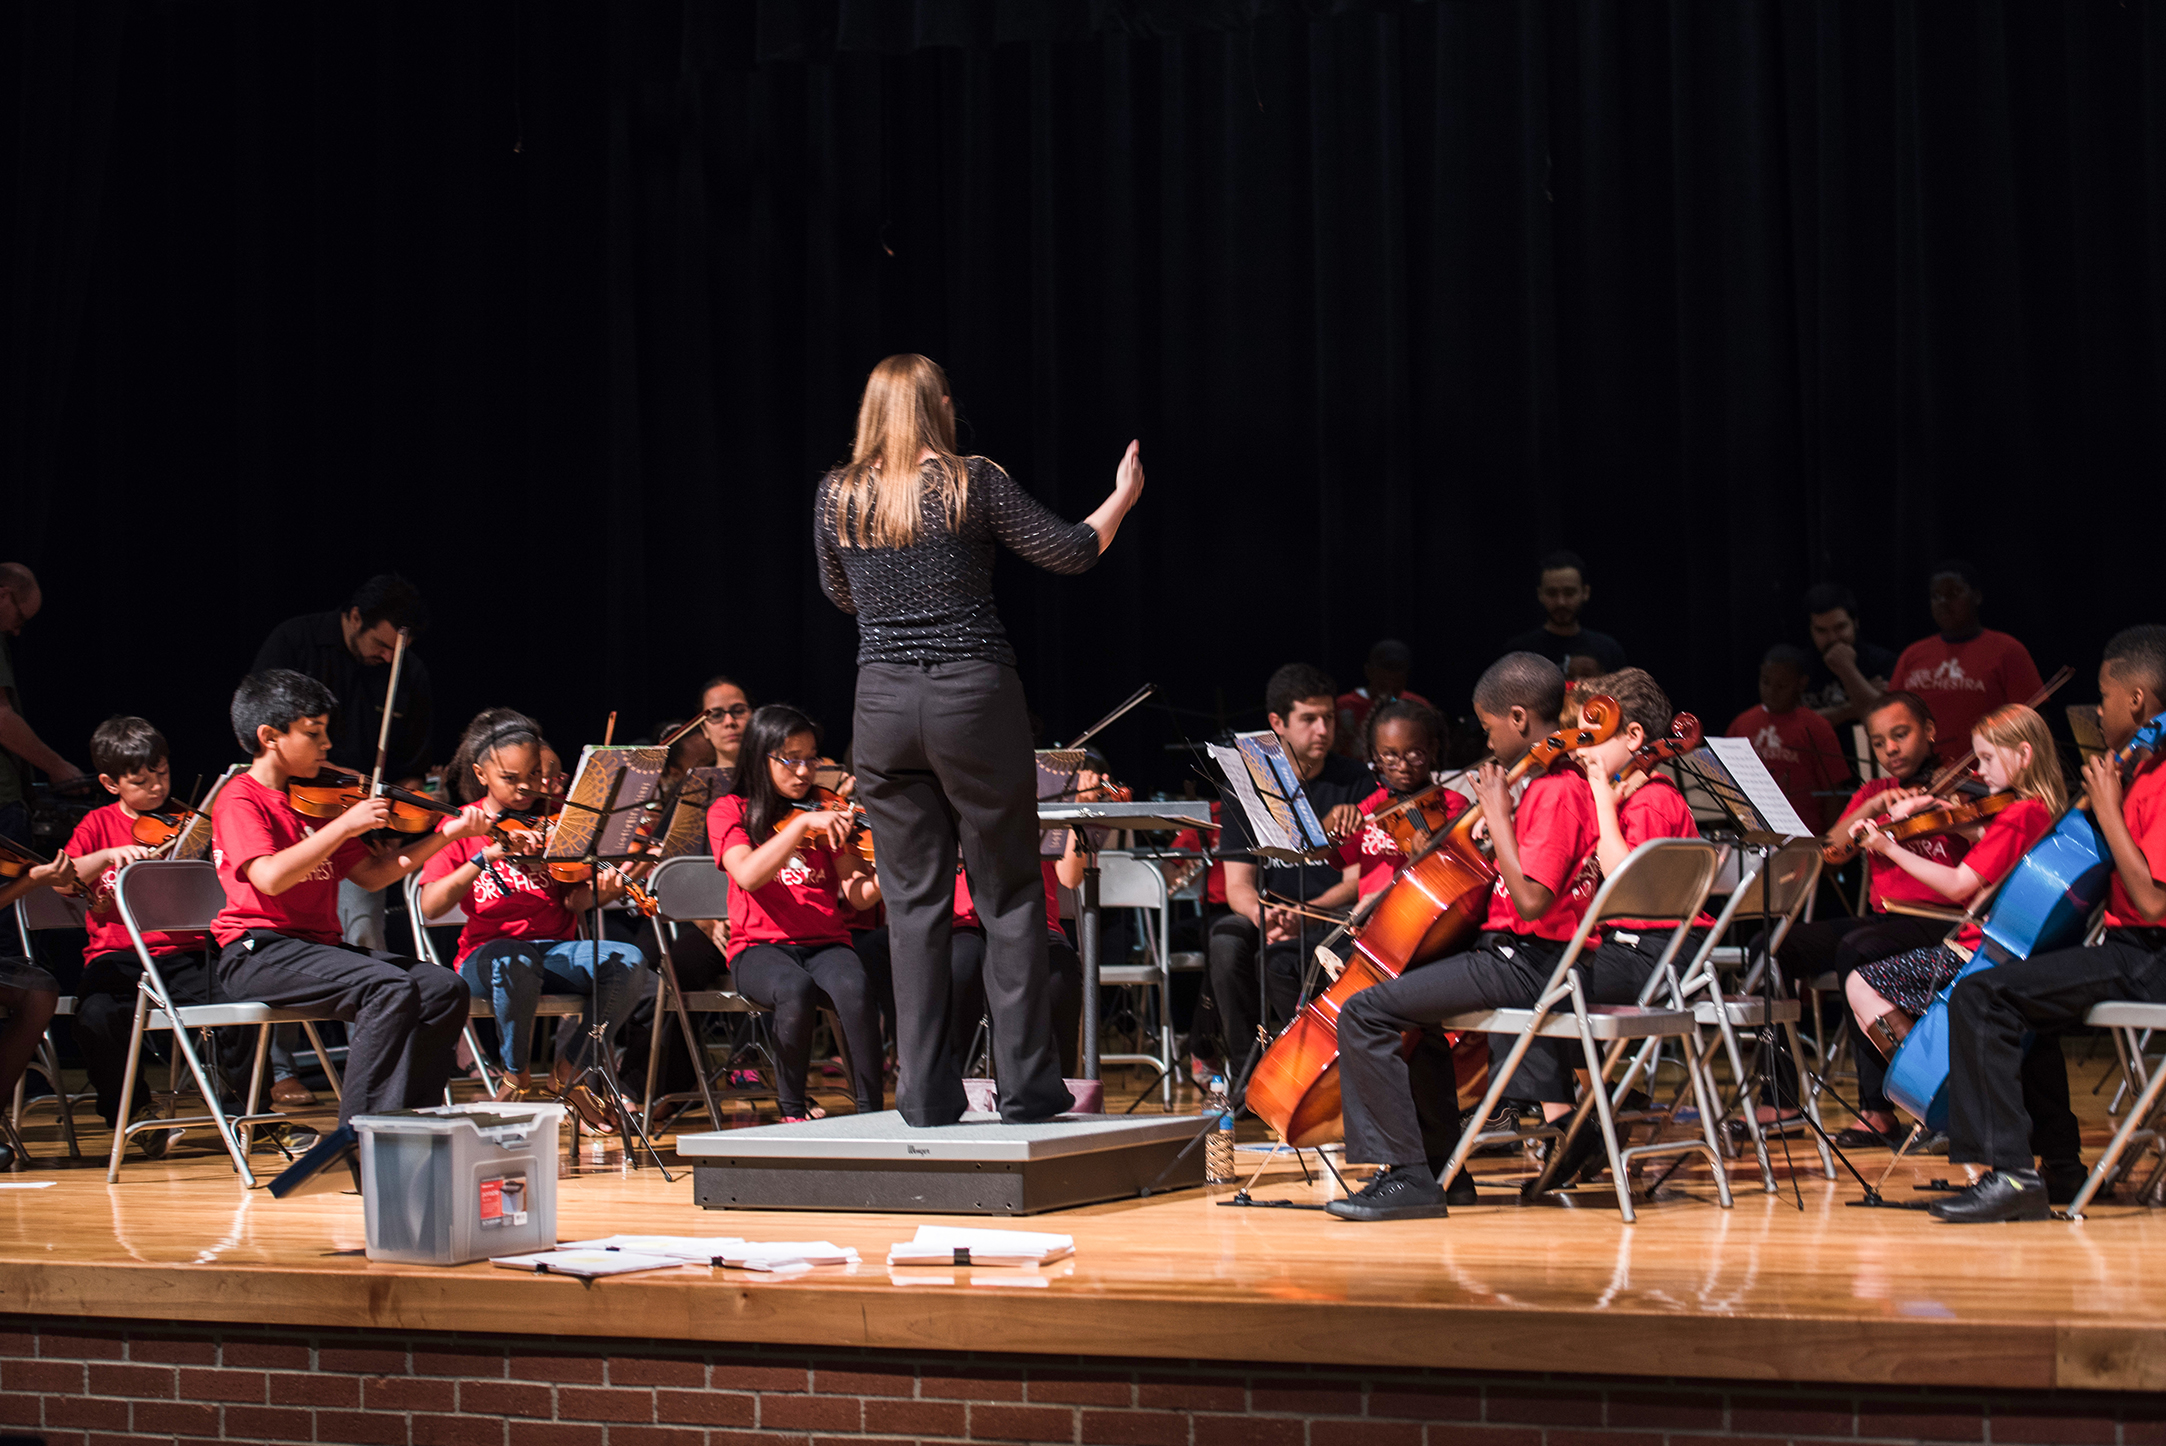 Conductor Christine Russell and other teaching artists guide the young musicians through rehearsals. Katie Barnett, Vivid Dream Photography.